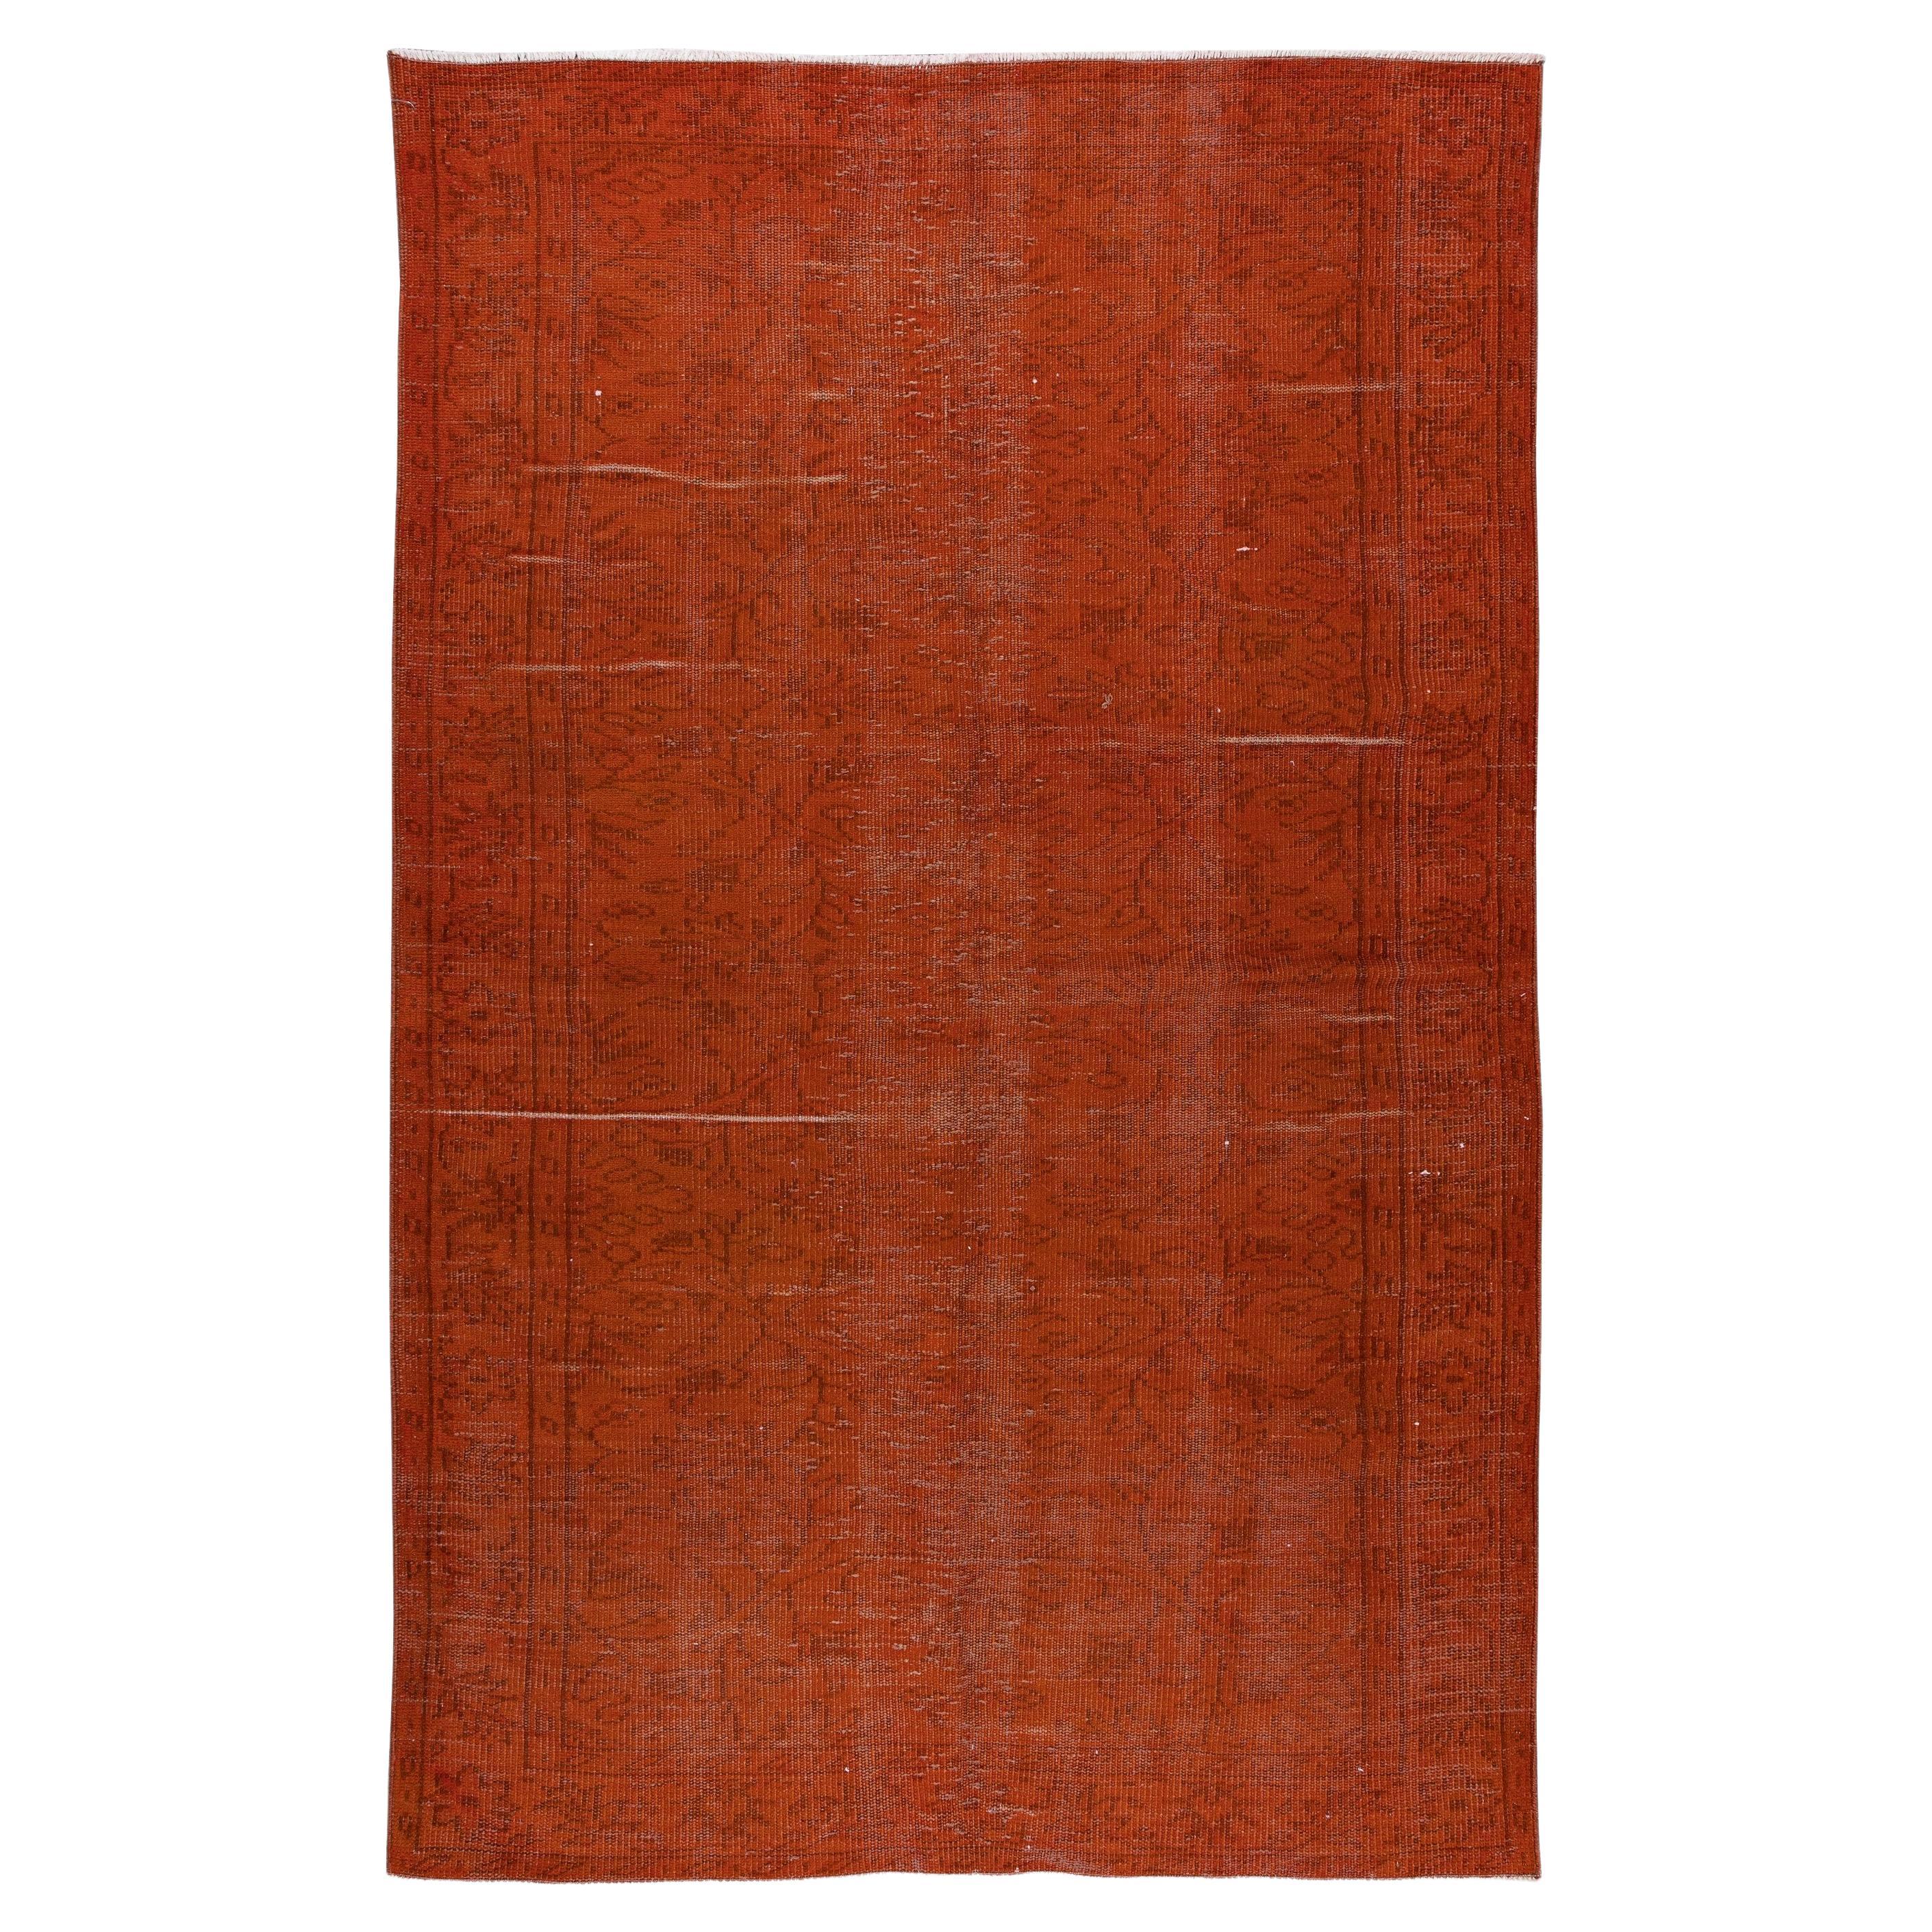 5.2x8.2 Ft Hand Knotted Turkish Rug Over-Dyed in Orange Contemporary Interiors